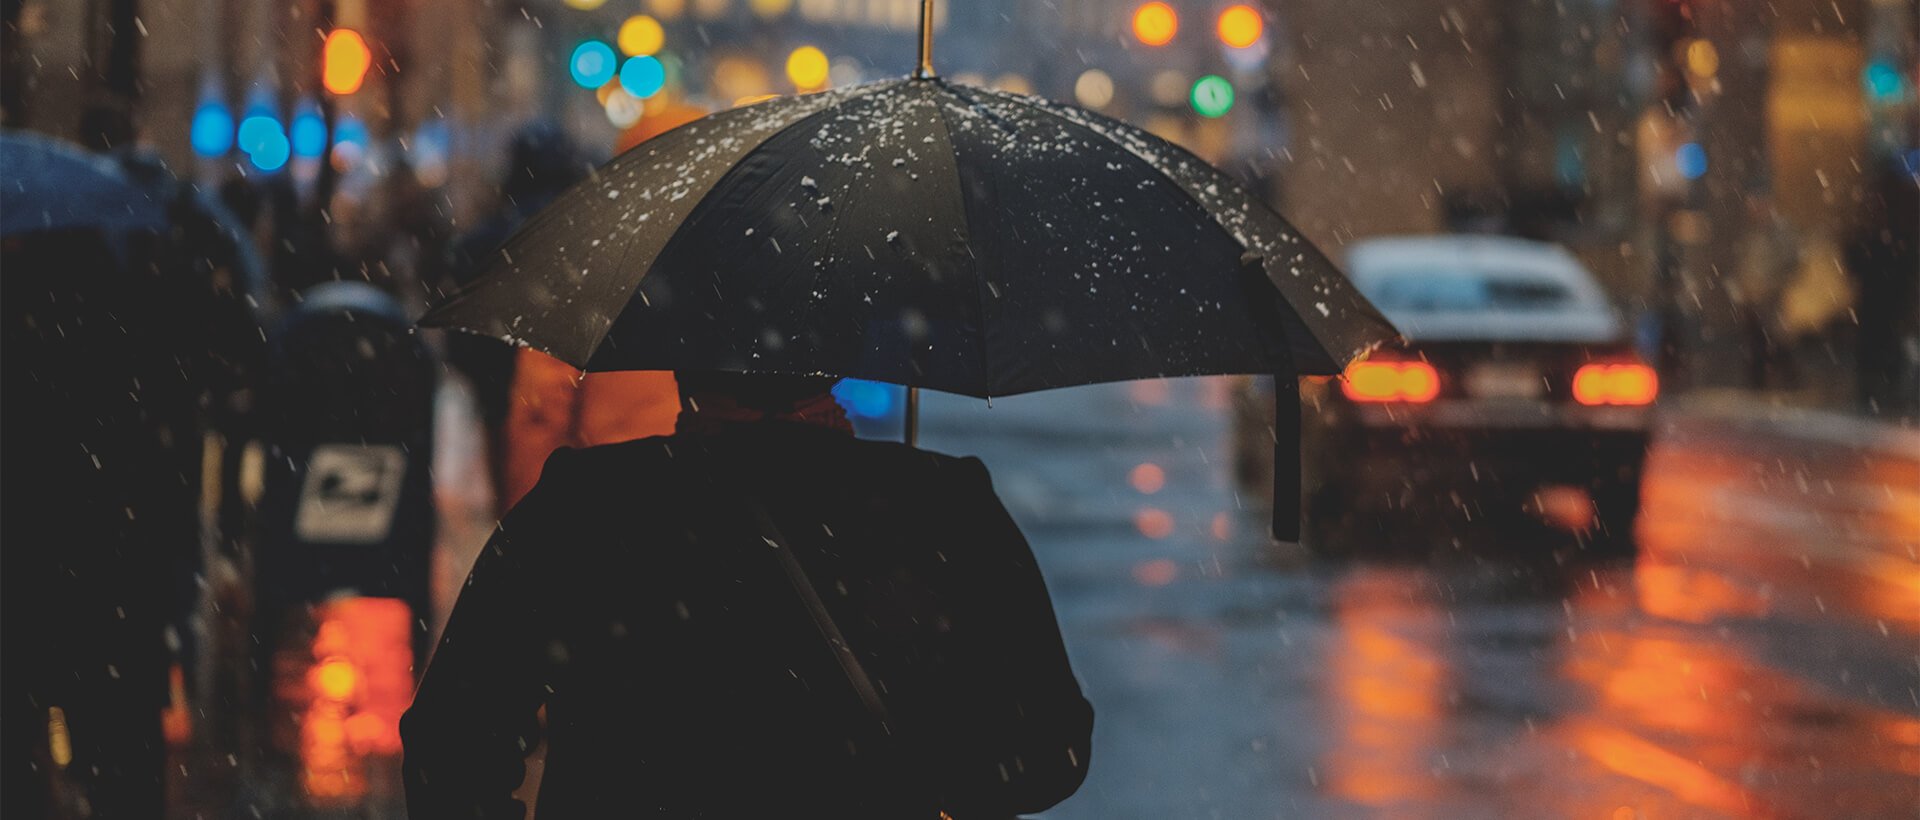 a person walking in the rain with an umbrella.